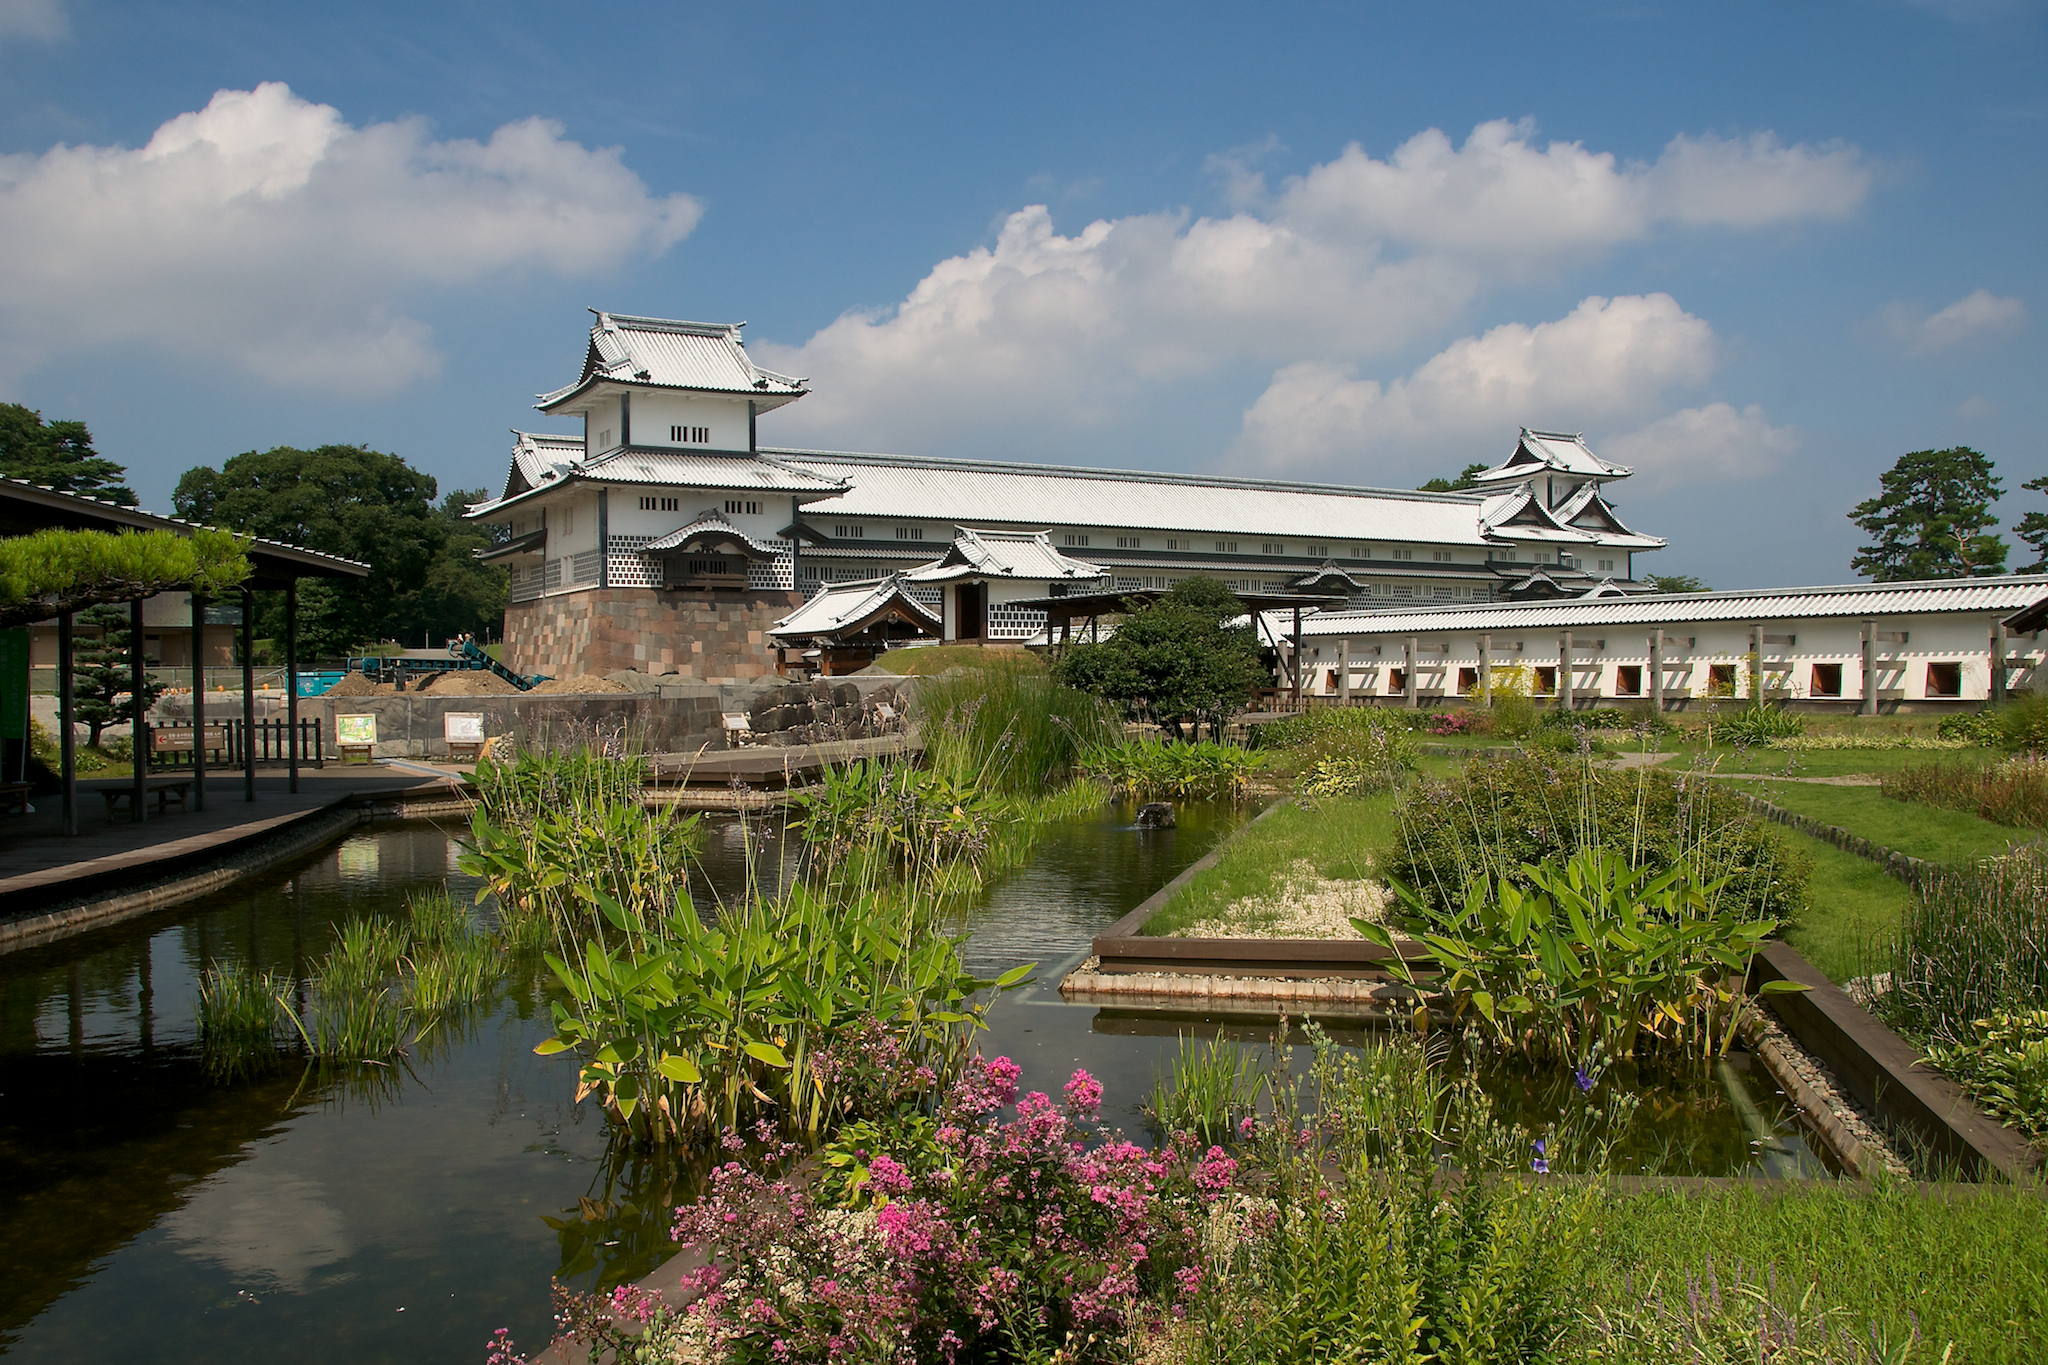 10 Best Things To Do in Kanazawa, Japan [with Suggested Tours]